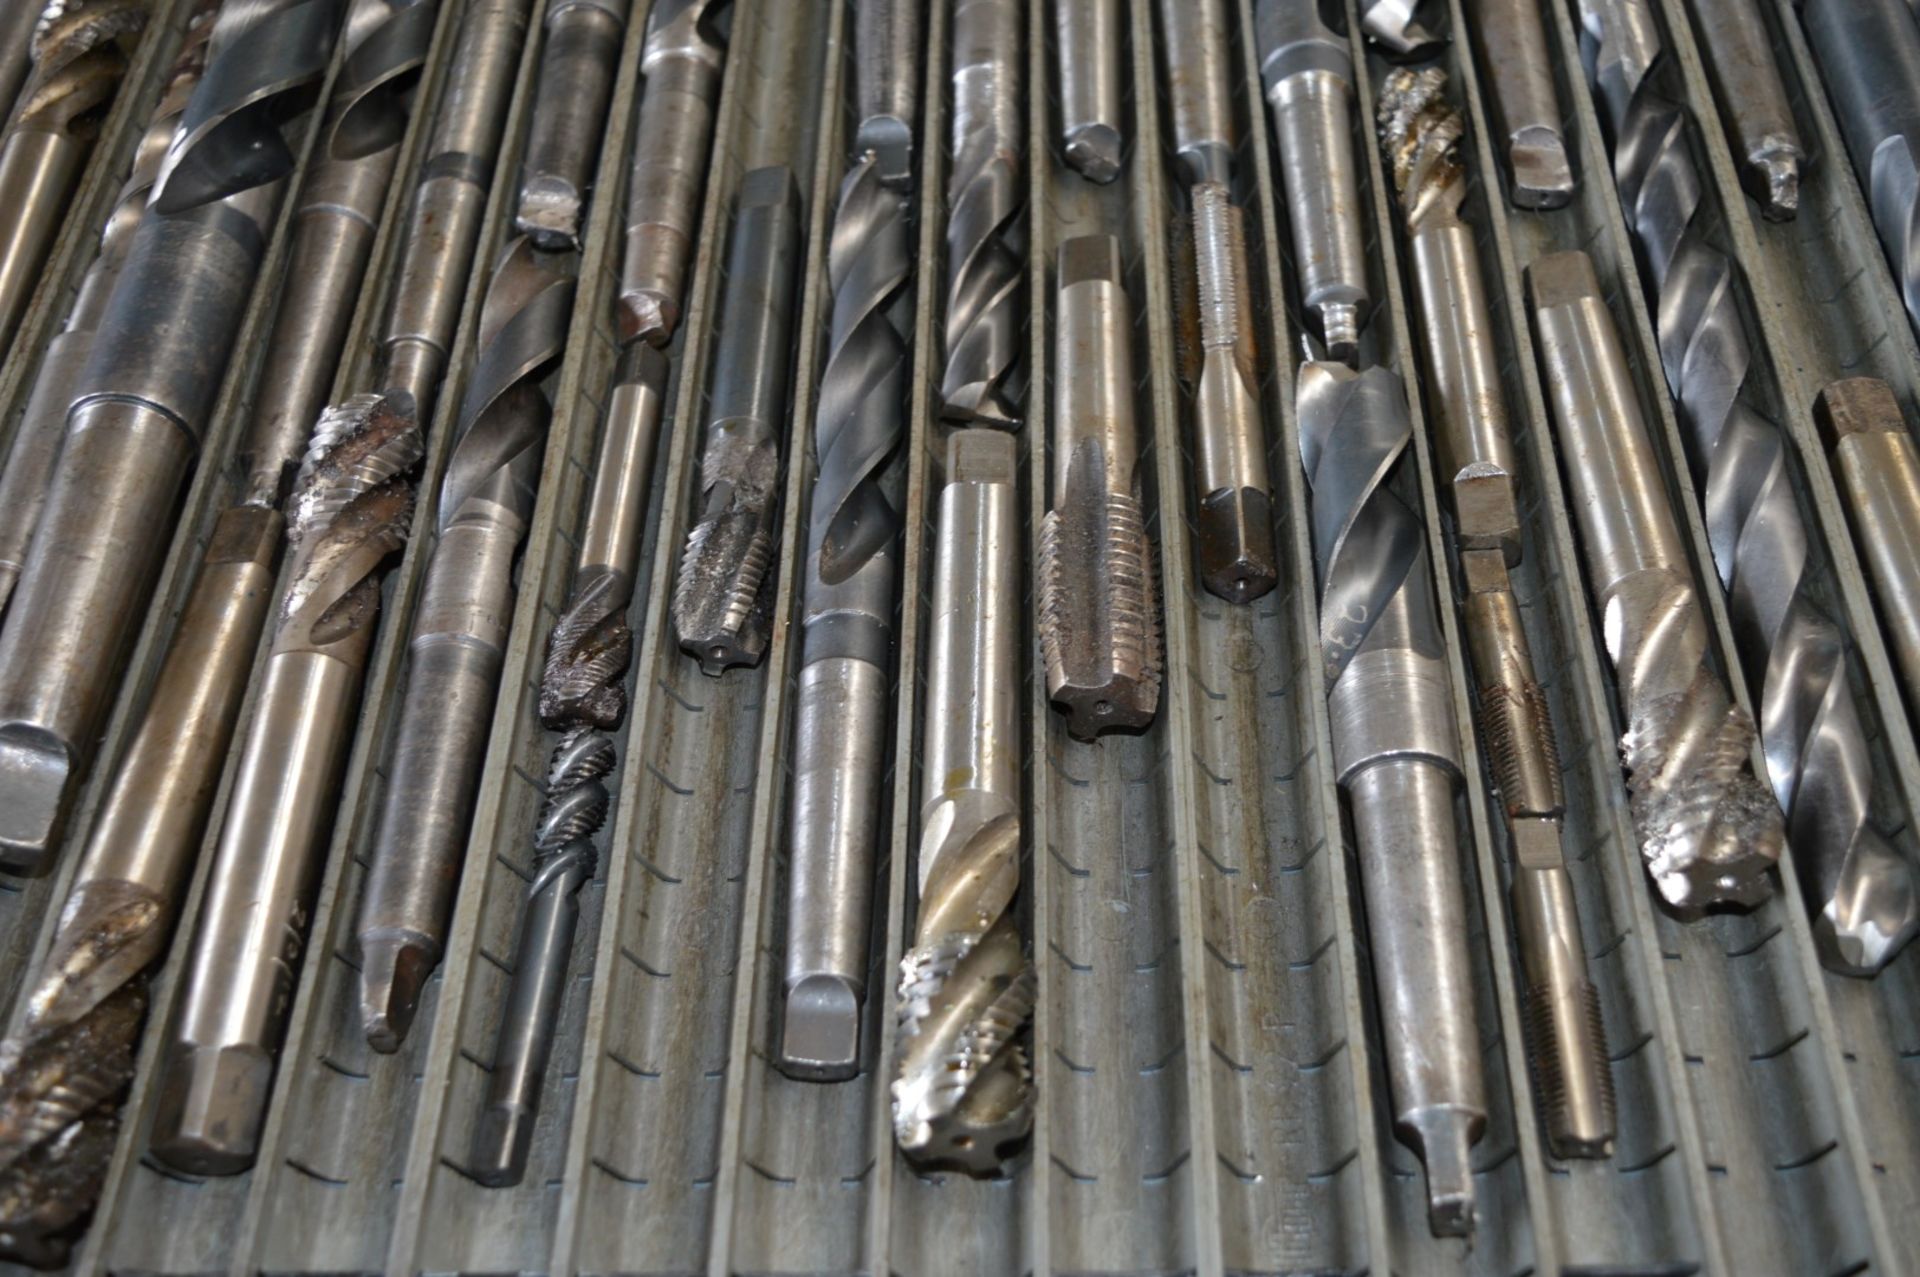 1 x Assorted Lot of Machine Drill Bits - Information to Follow - Please See Pictures Provided - - Image 9 of 11